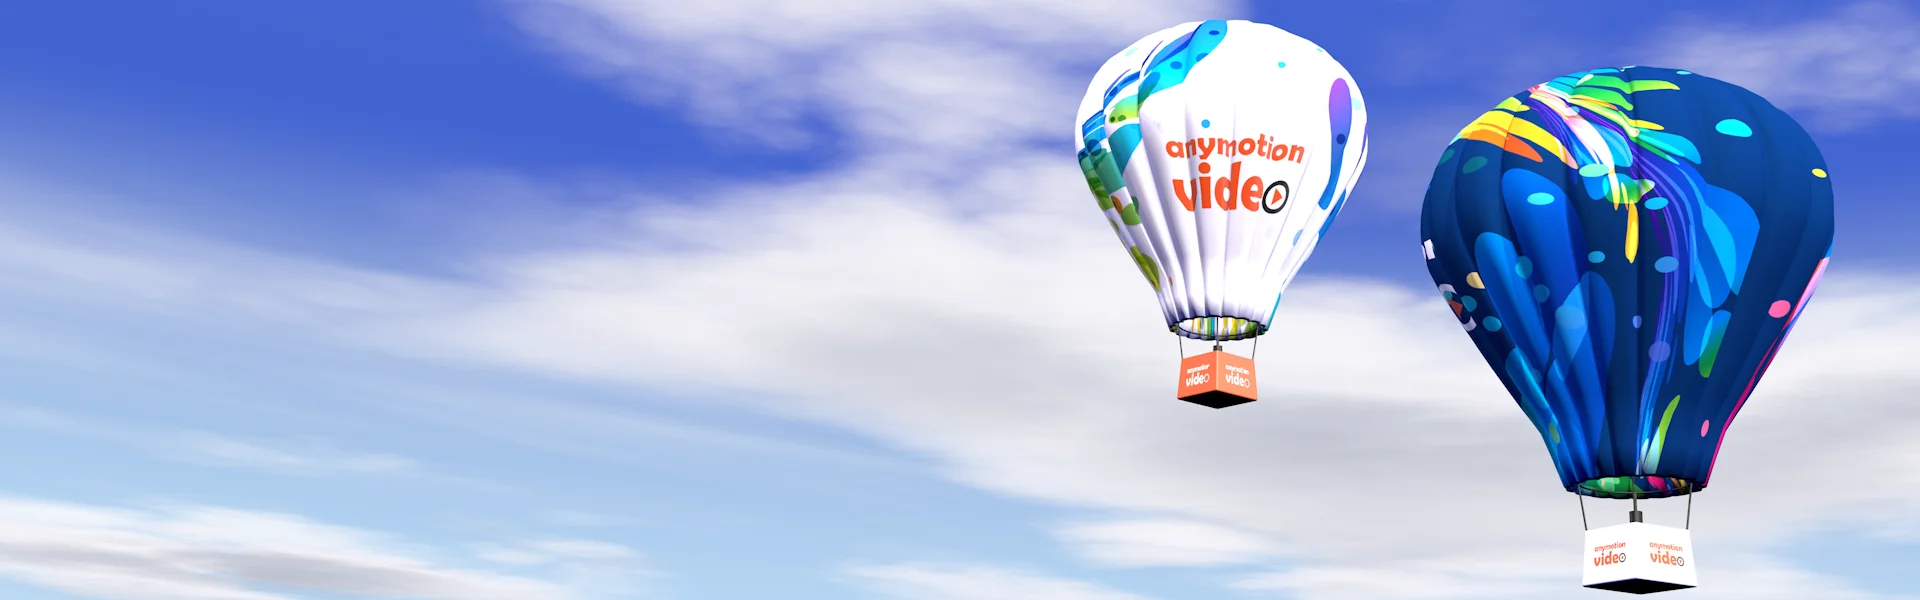 air balloons v2: Animation can make your ideas fly